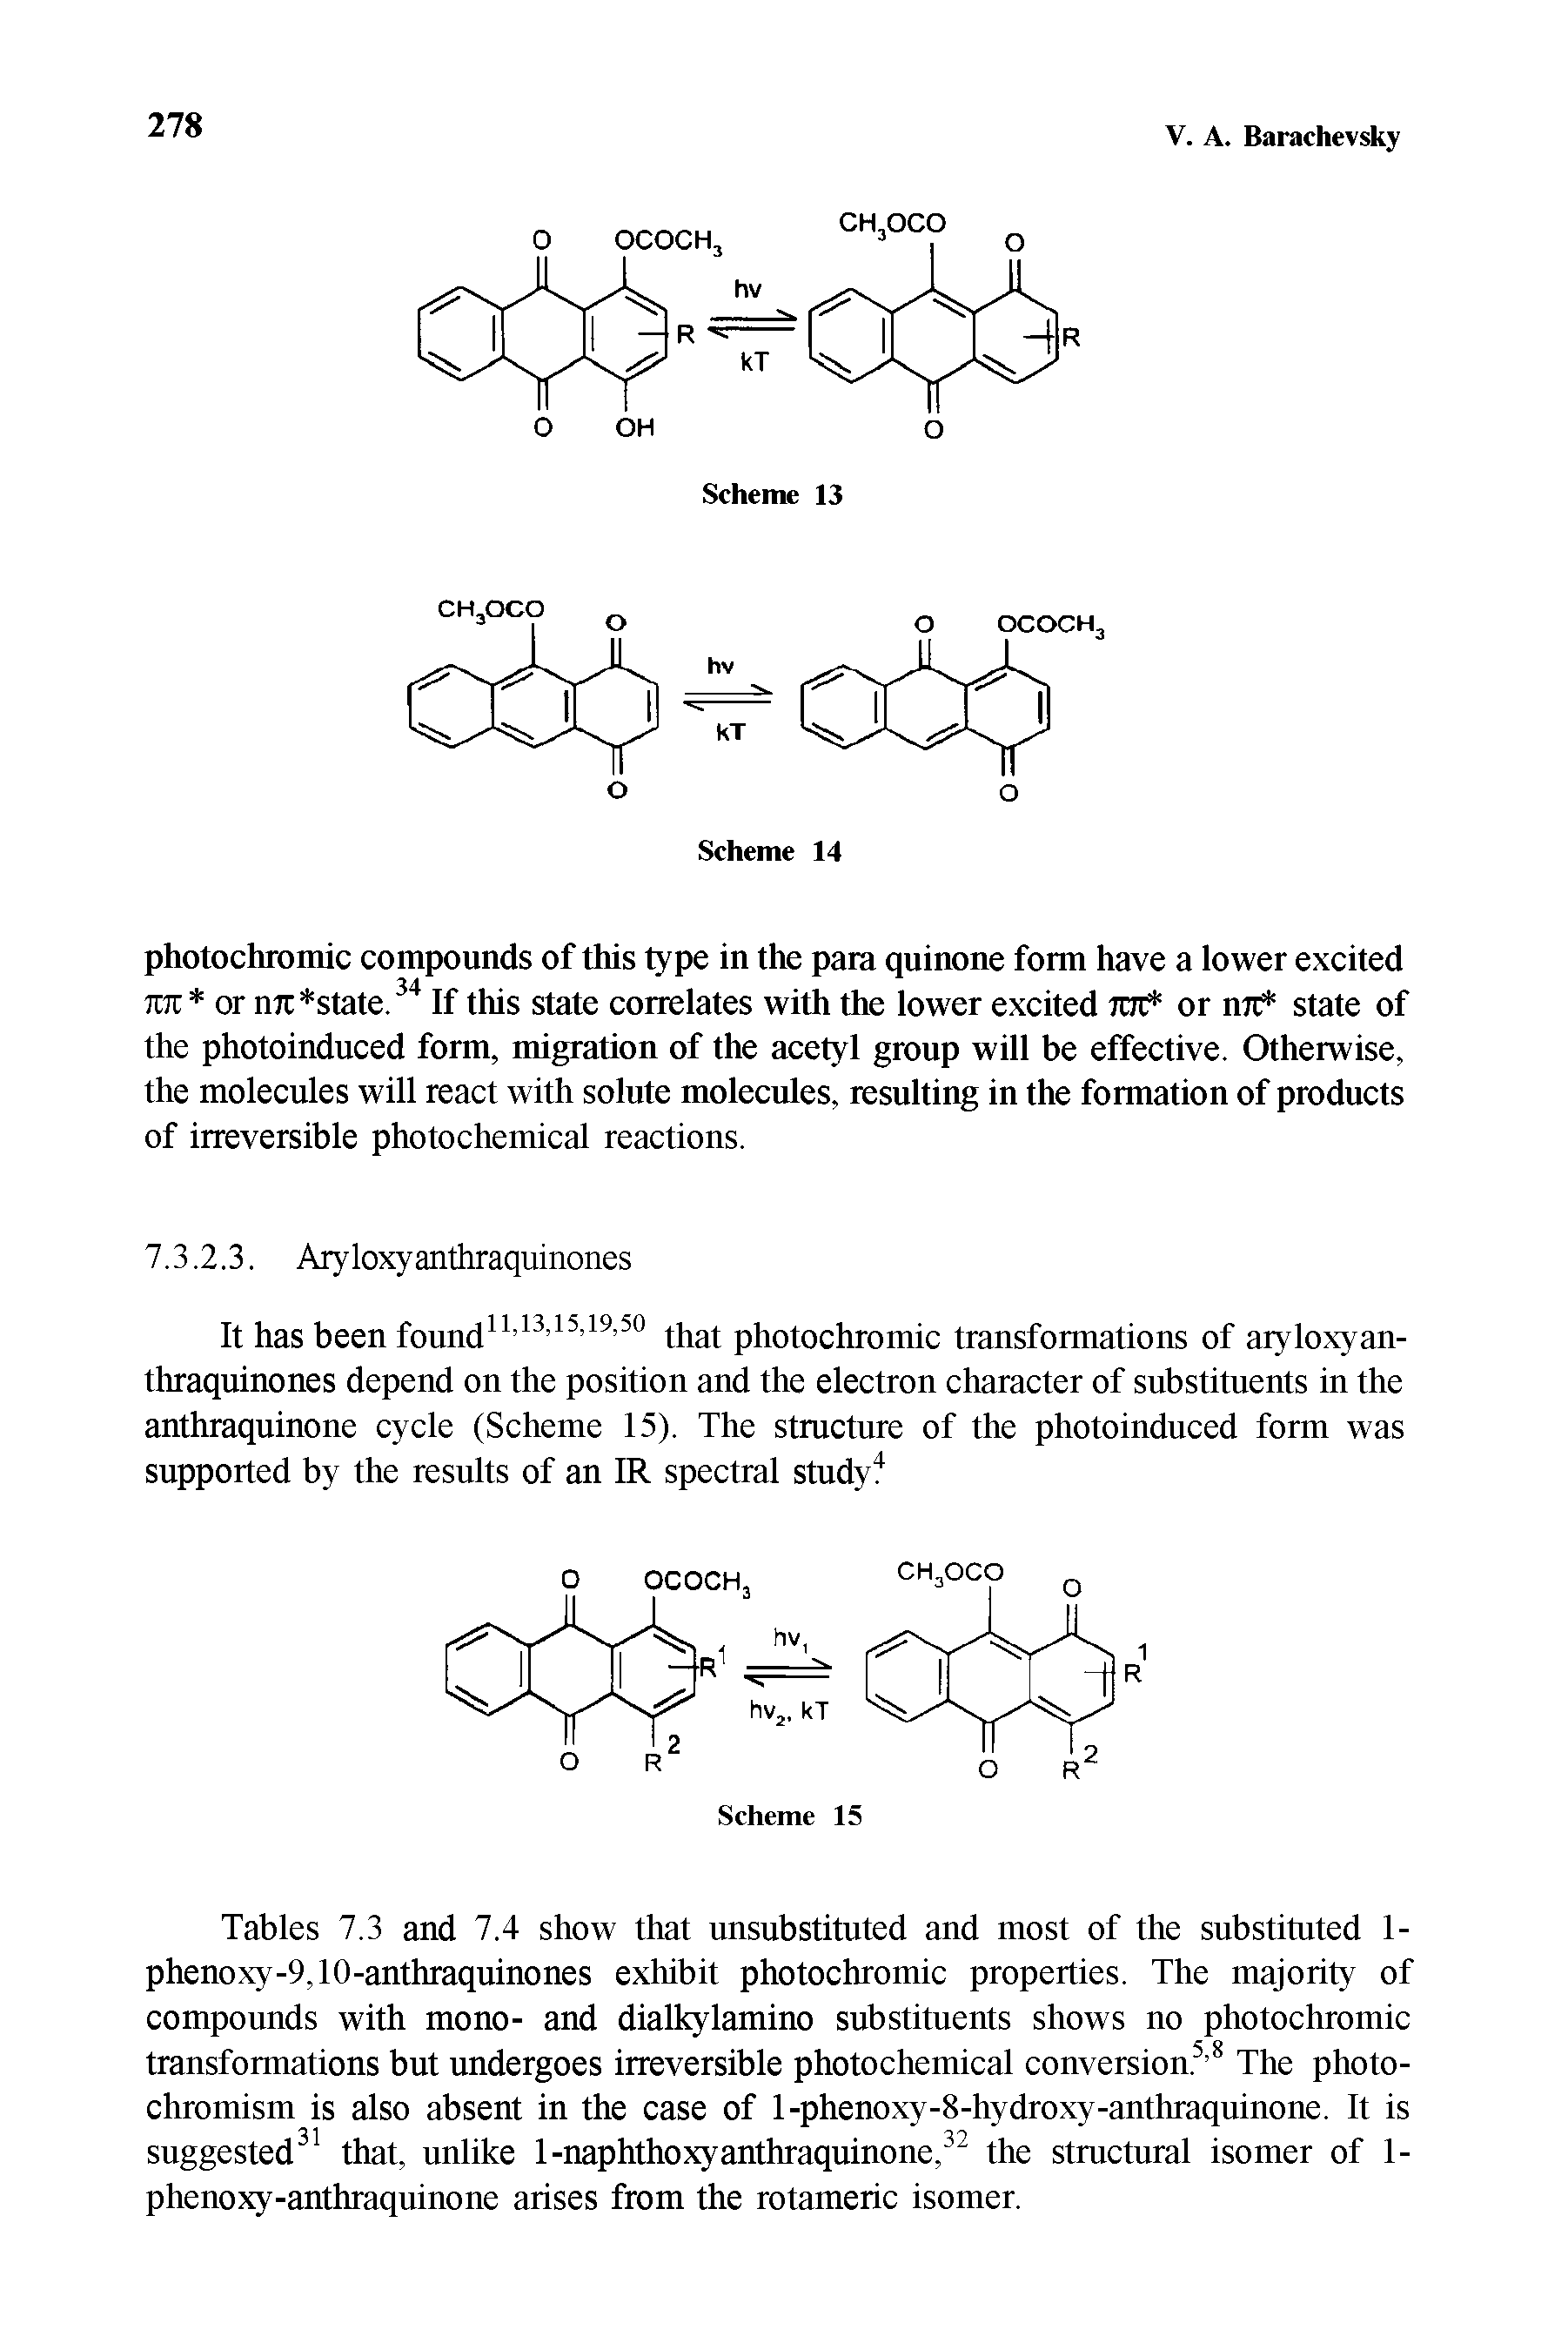 Tables 7.3 and 7.4 show that unsubstituted and most of the substituted 1-phenoxy-9,10-anthraquinones exhibit photochromic properties. The majority of compounds with mono- and dialkylamino substituents shows no photochromic transformations but undergoes irreversible photochemical conversion.5,8 The photo-chromism is also absent in the case of l-phenoxy-8-hydroxy-anthraquinone. It is suggested31 that, unlike 1-naphthoxyanthraquinone,32 the structural isomer of 1-phenoxy-anthraquinone arises from the rotameric isomer.